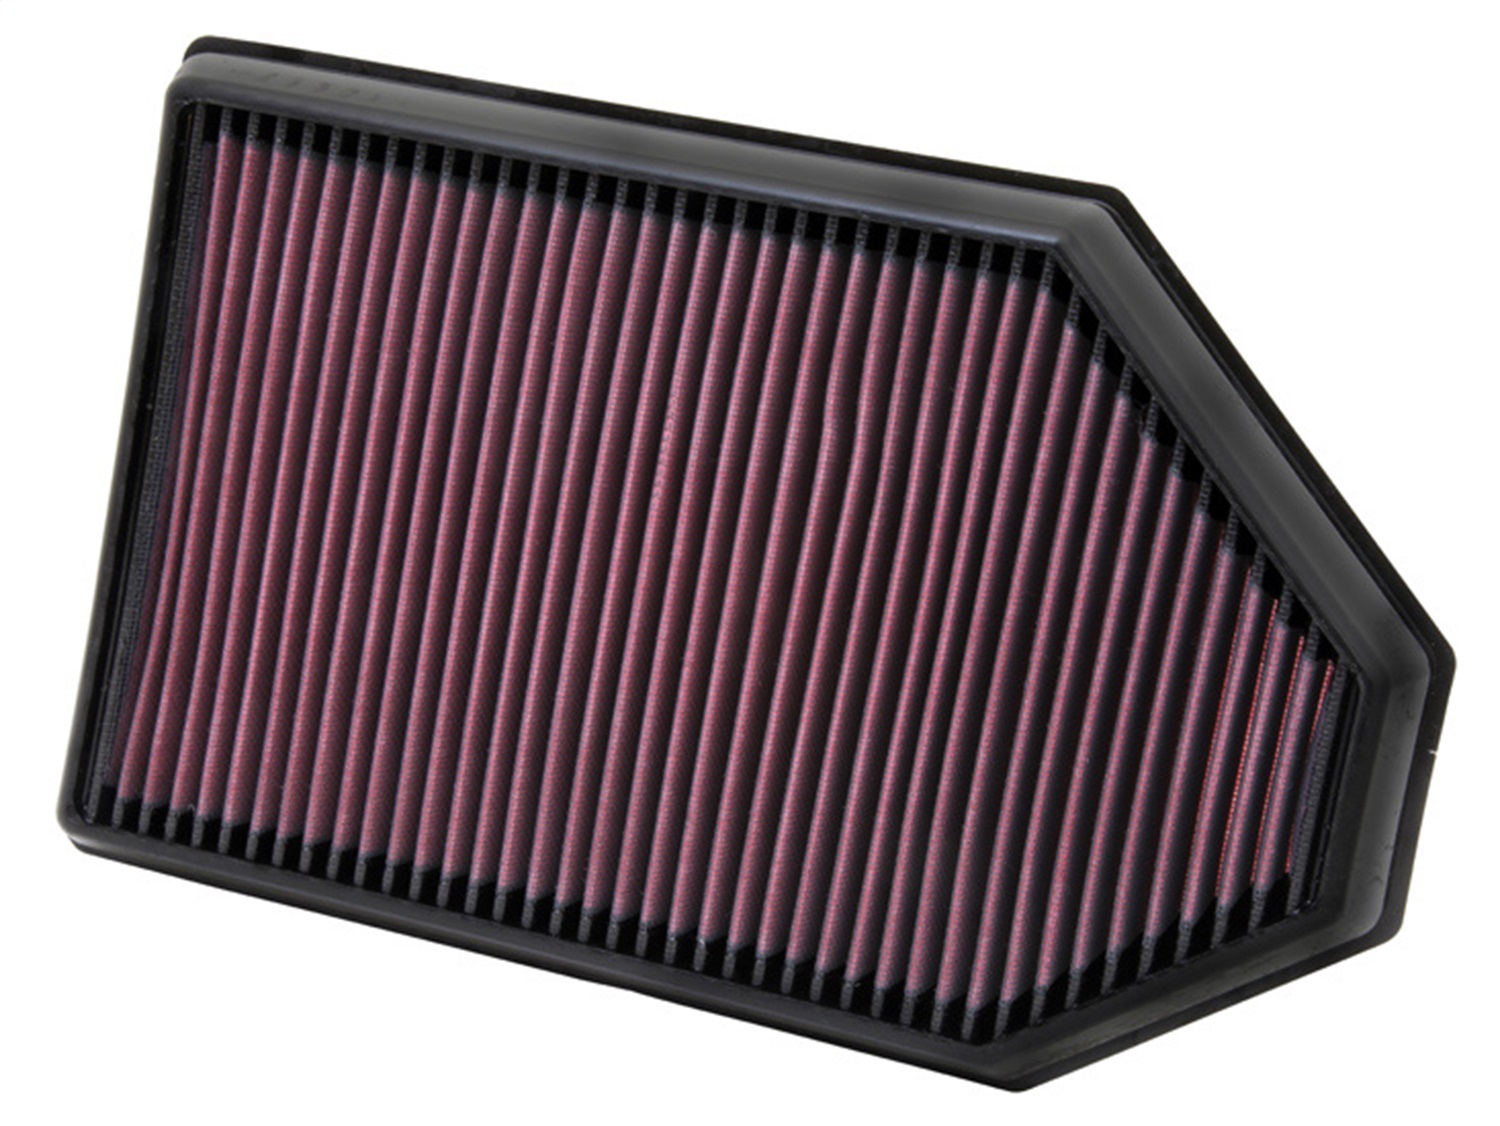 K&N Filters K&N Filters 33-2460 Air Filter Fits 11-15 300 Challenger Charger